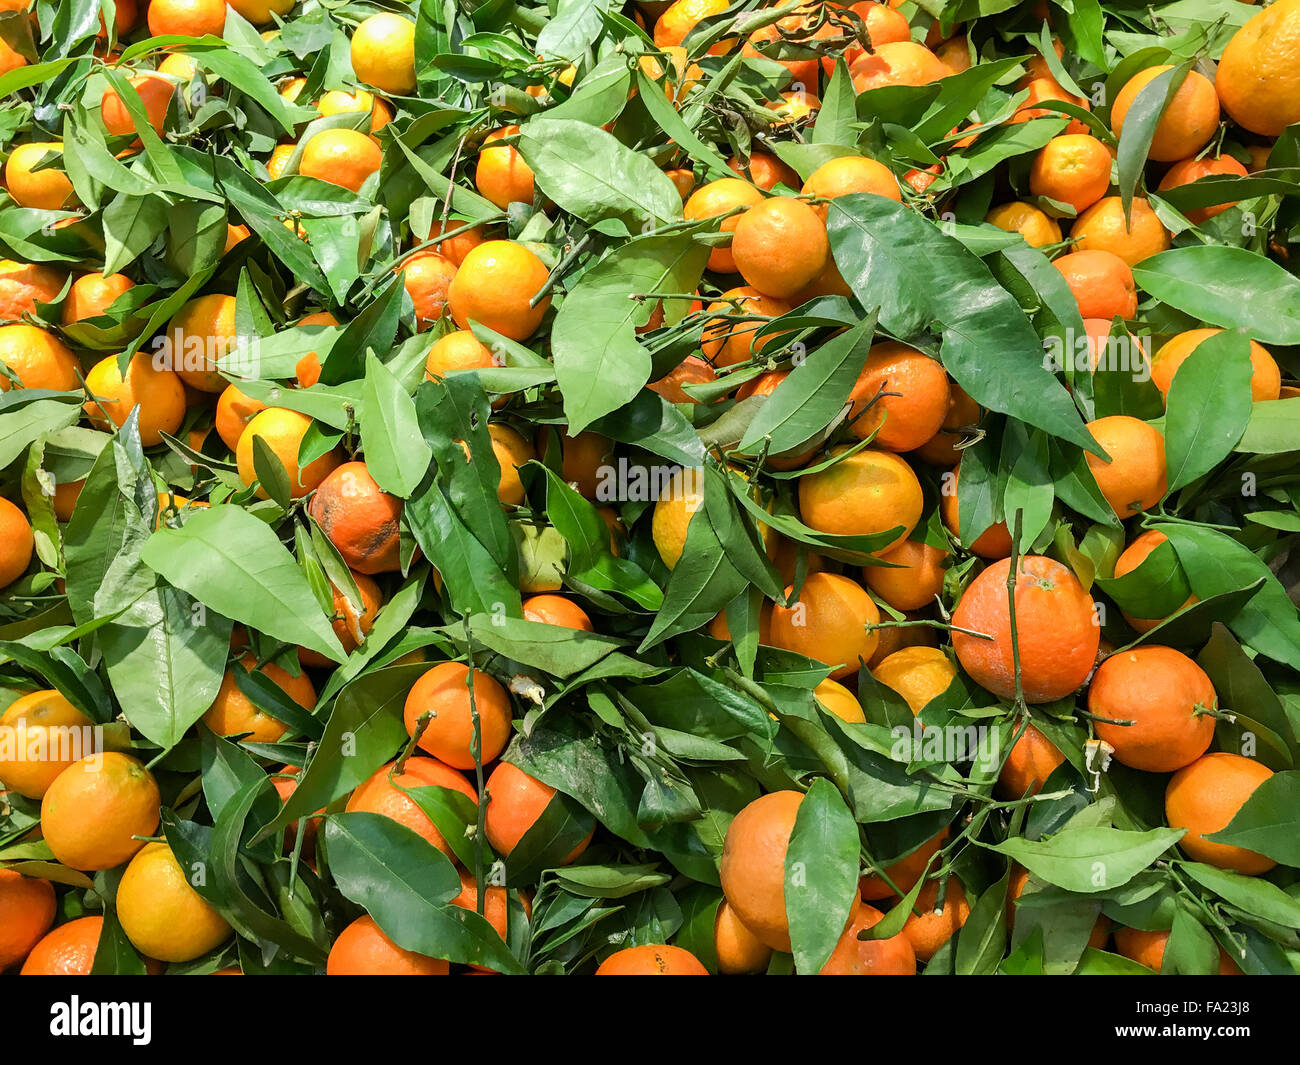 Colorful Display Of Tangerines In Fruit Market Stock Photo